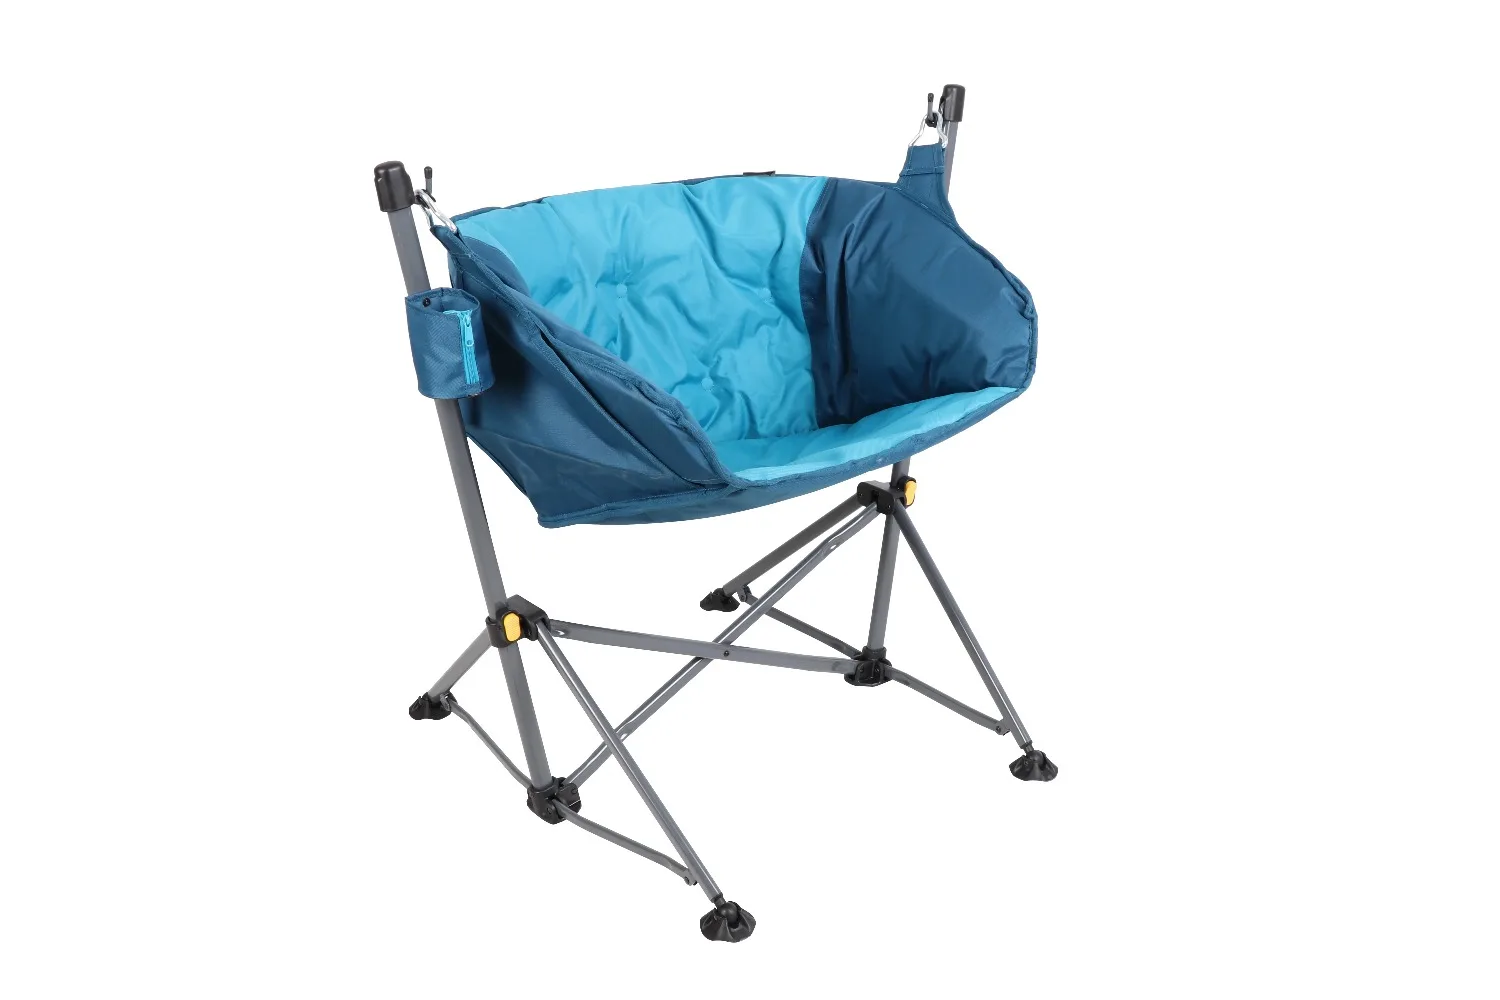 

Ozark Trail Structured Hammock Chair, Color Blue, Product Size 39.2” x 33.5” x 37.9”, Recycled Polyester